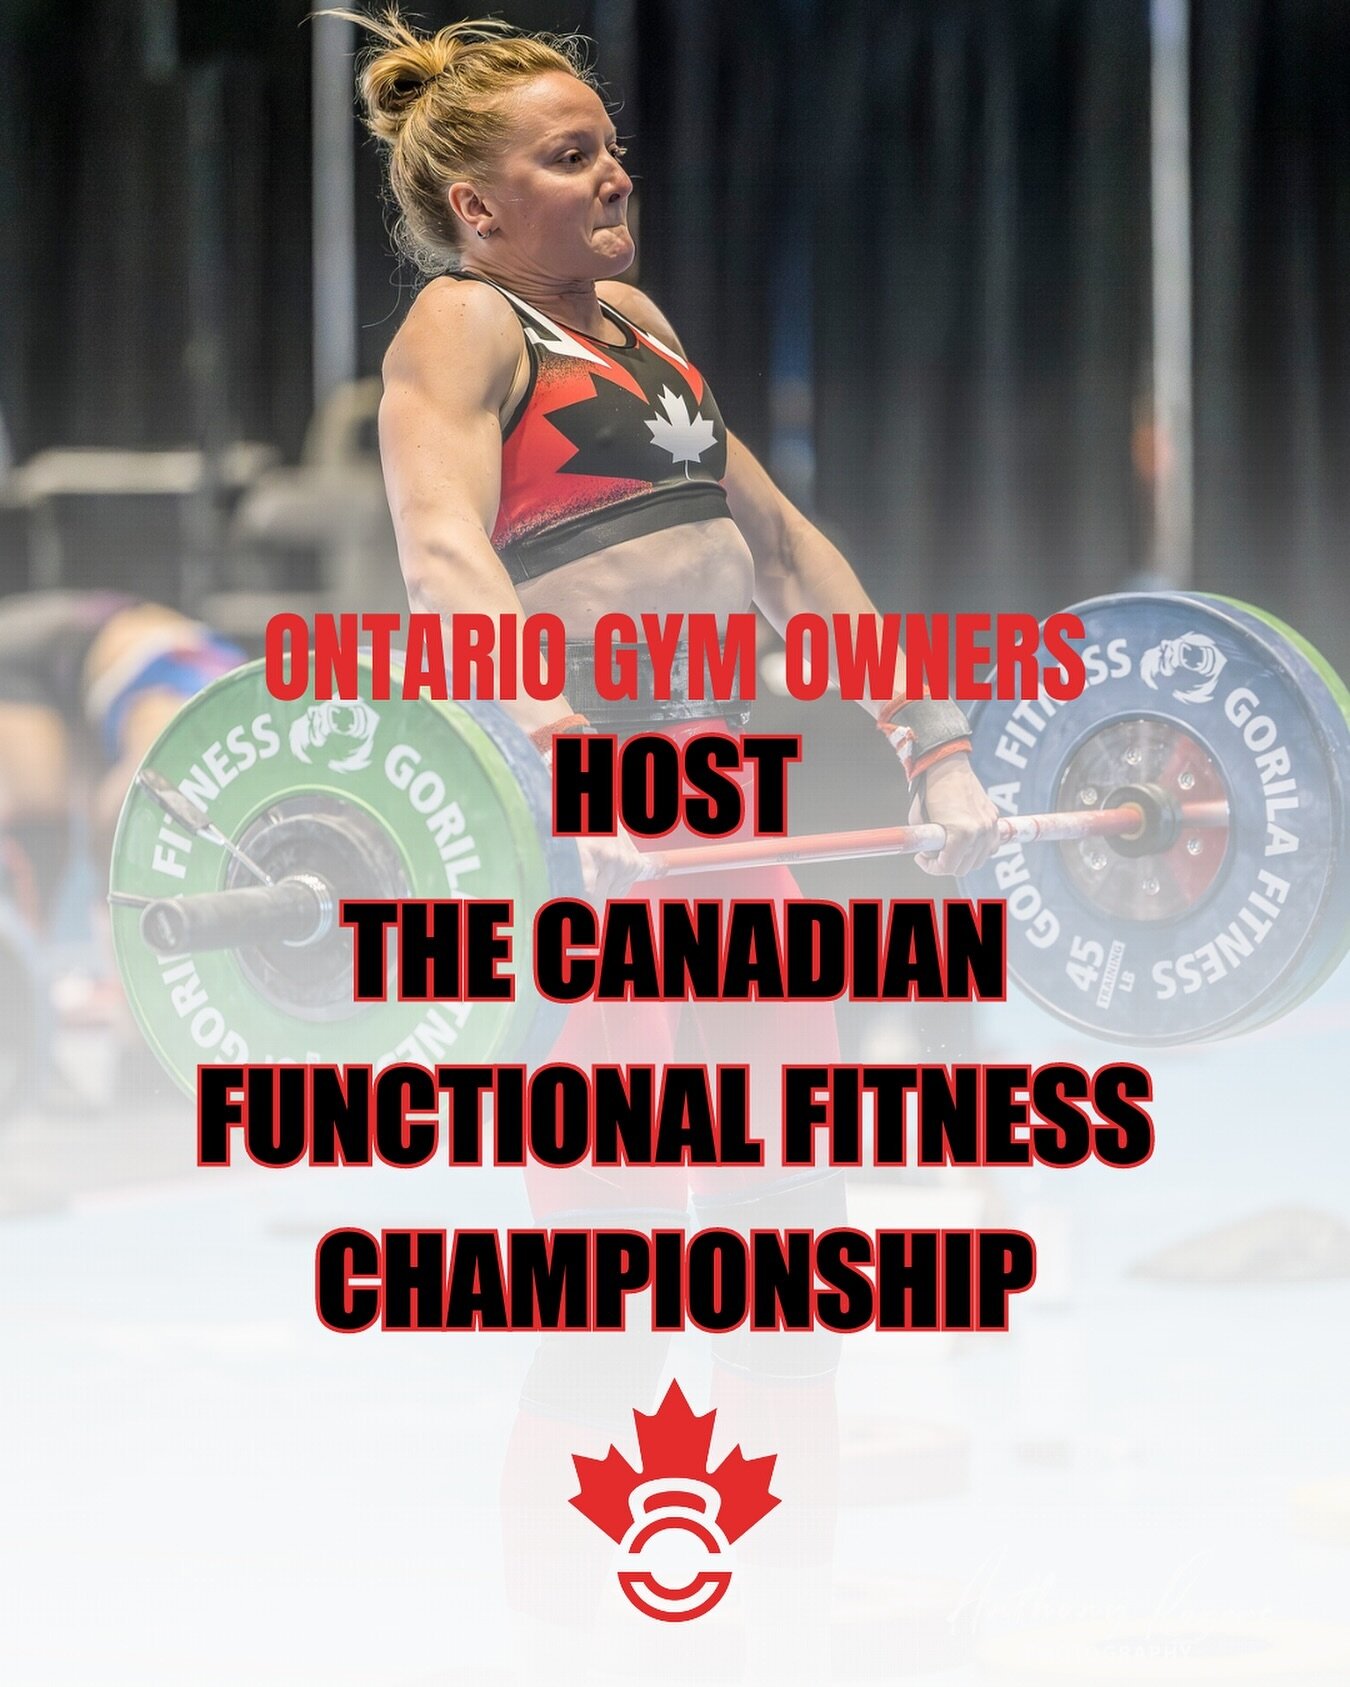 🚨🚨🚨Attention Gym Owners🚨🚨🚨

Canadian Functional Fitness Federation is looking for a host gym for this year&rsquo;s Canadian Functional Fitness Championship!

The top athletes from this Championship will compete in the World Championship in Hung